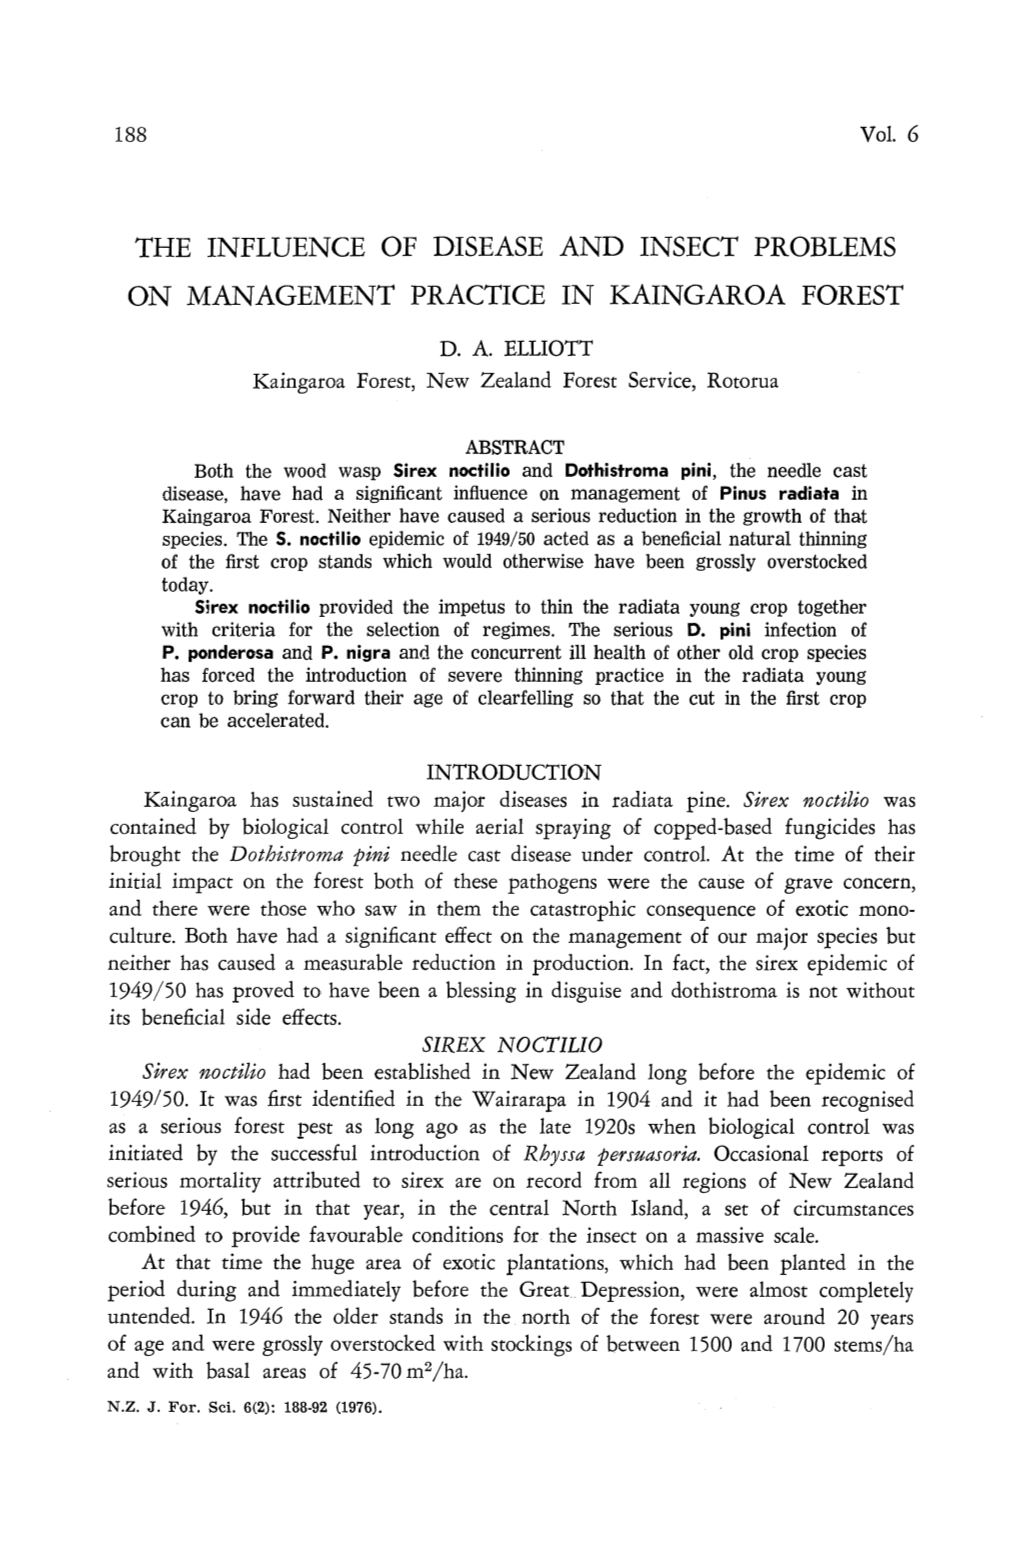 The Influence of Disease and Insect Problems on Management Practice in Kaingaroa Forest